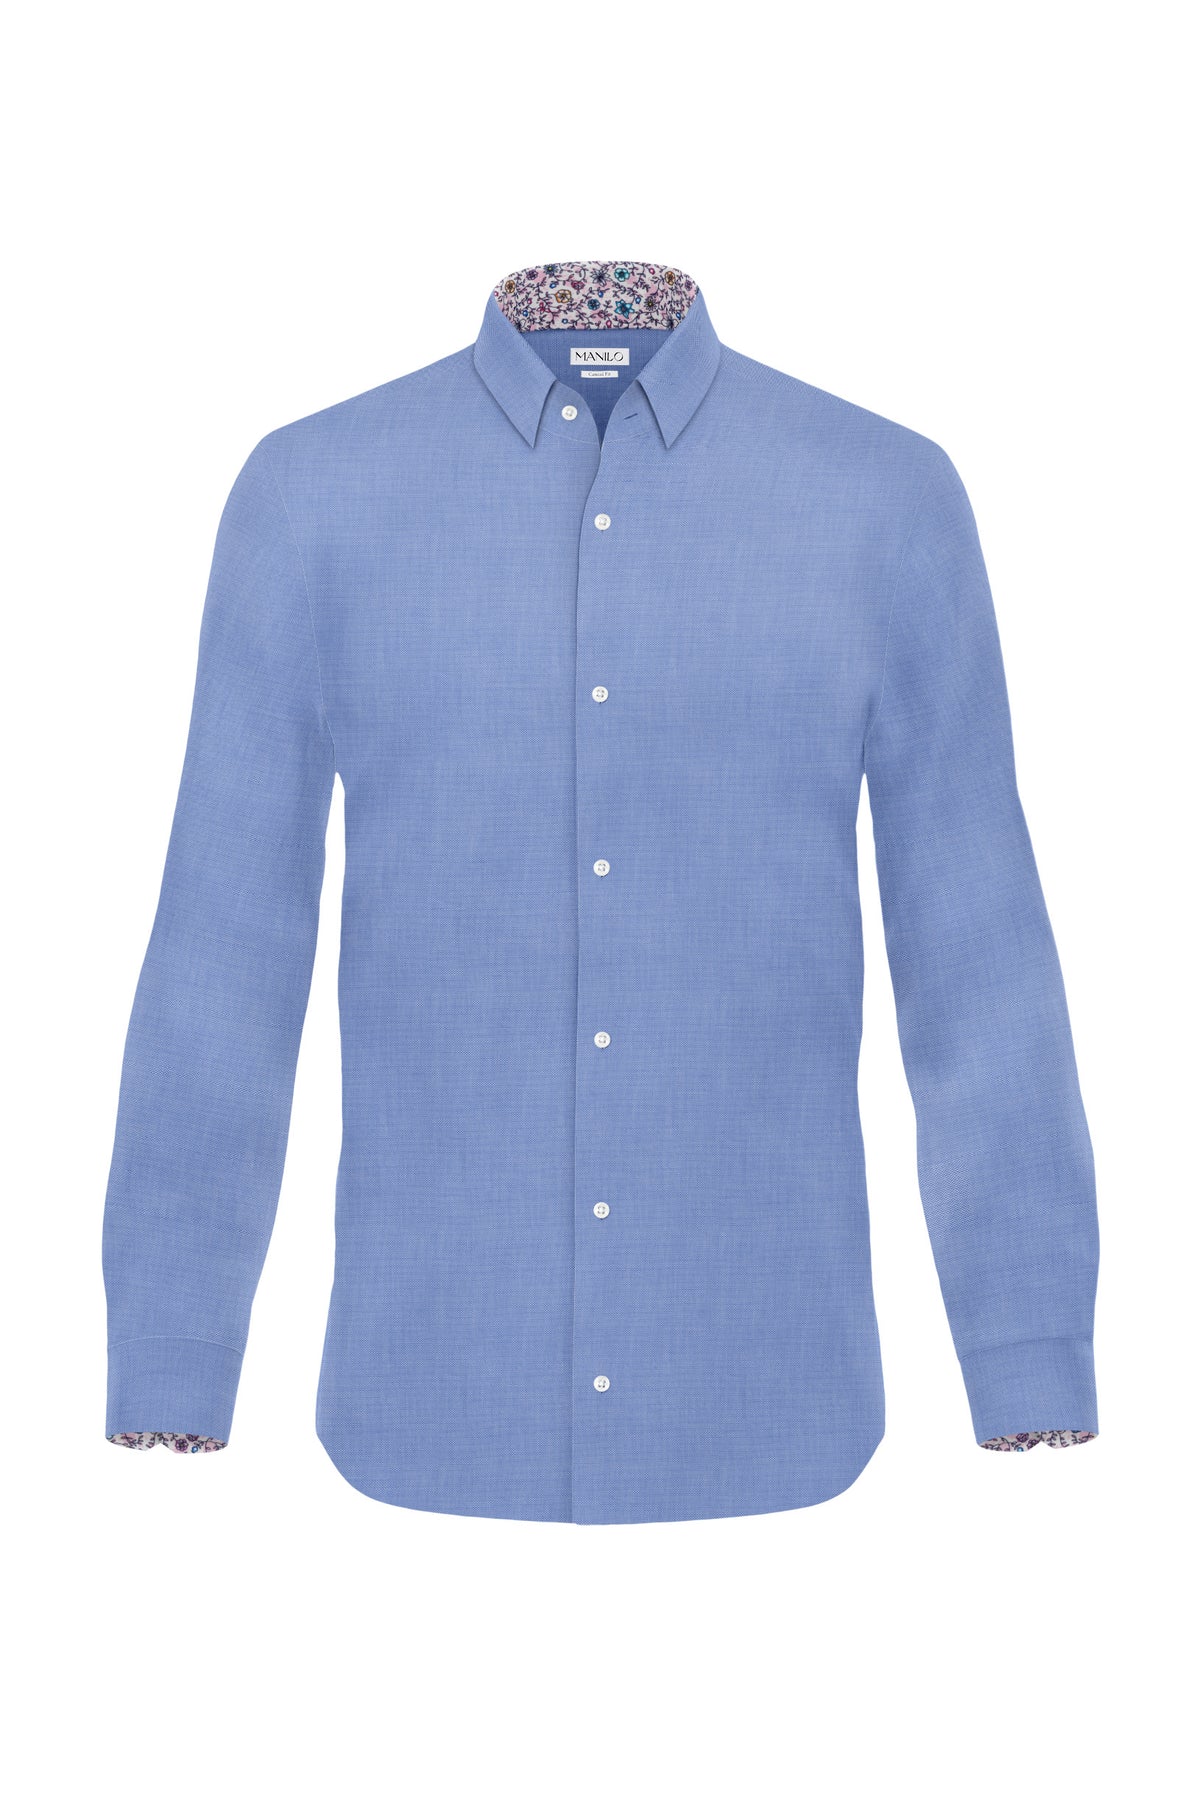 Casual shirt with summery print pattern in collar and cuff in blue (Art. 2253-C)